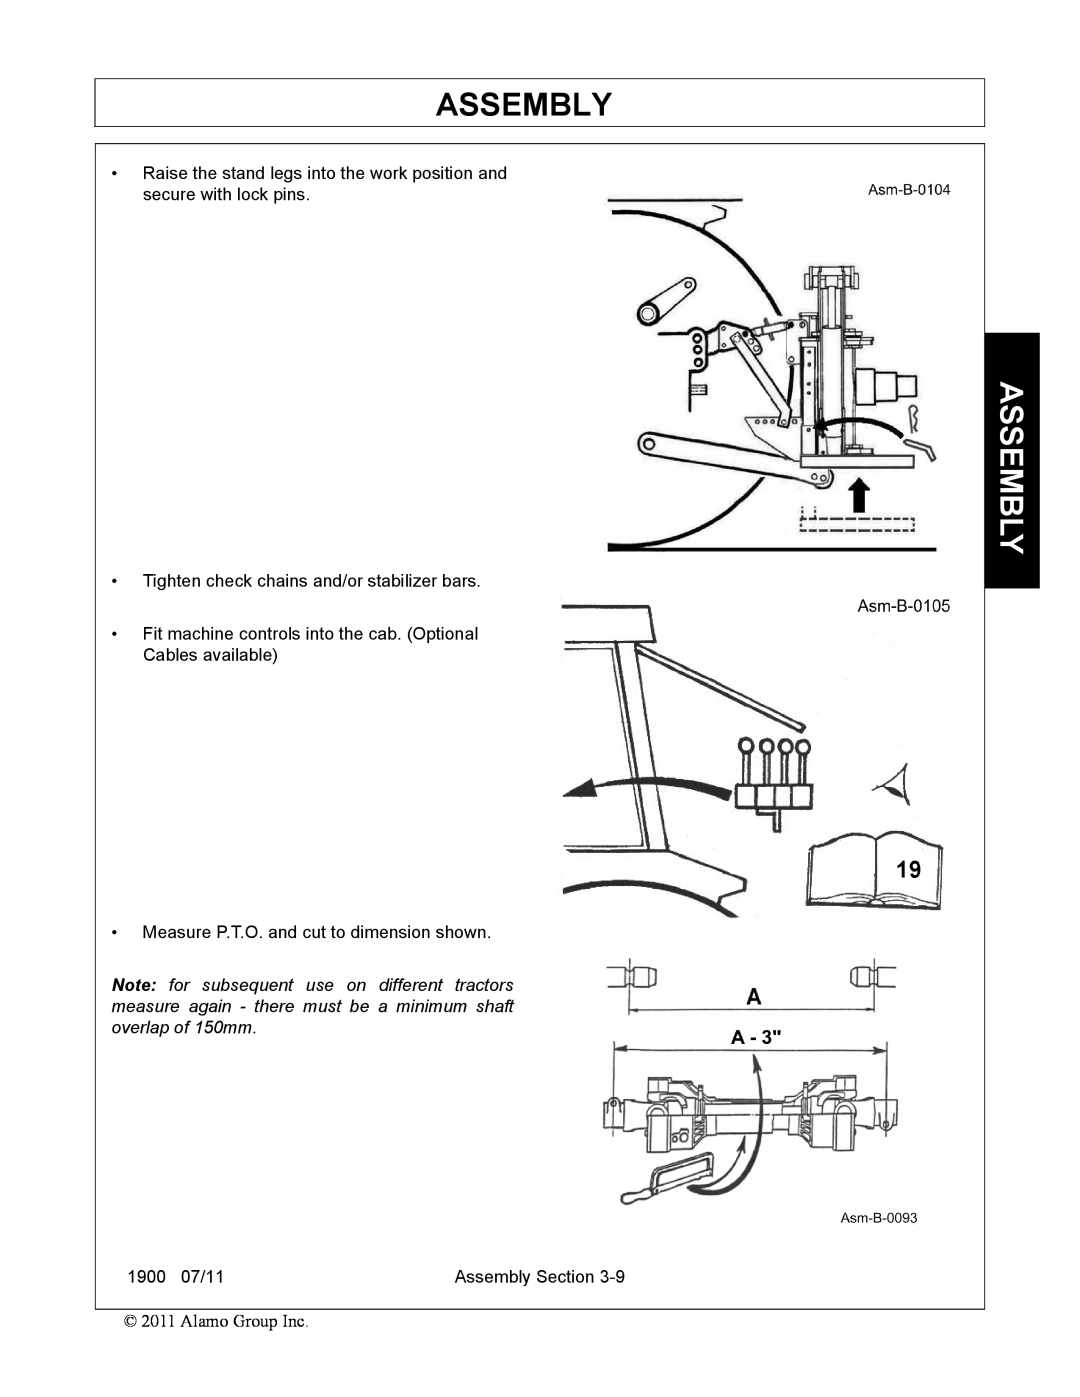 Alamo Assembly, •Tighten check chains and/or stabilizer bars, •Measure P.T.O. and cut to dimension shown, 1900 07/11 